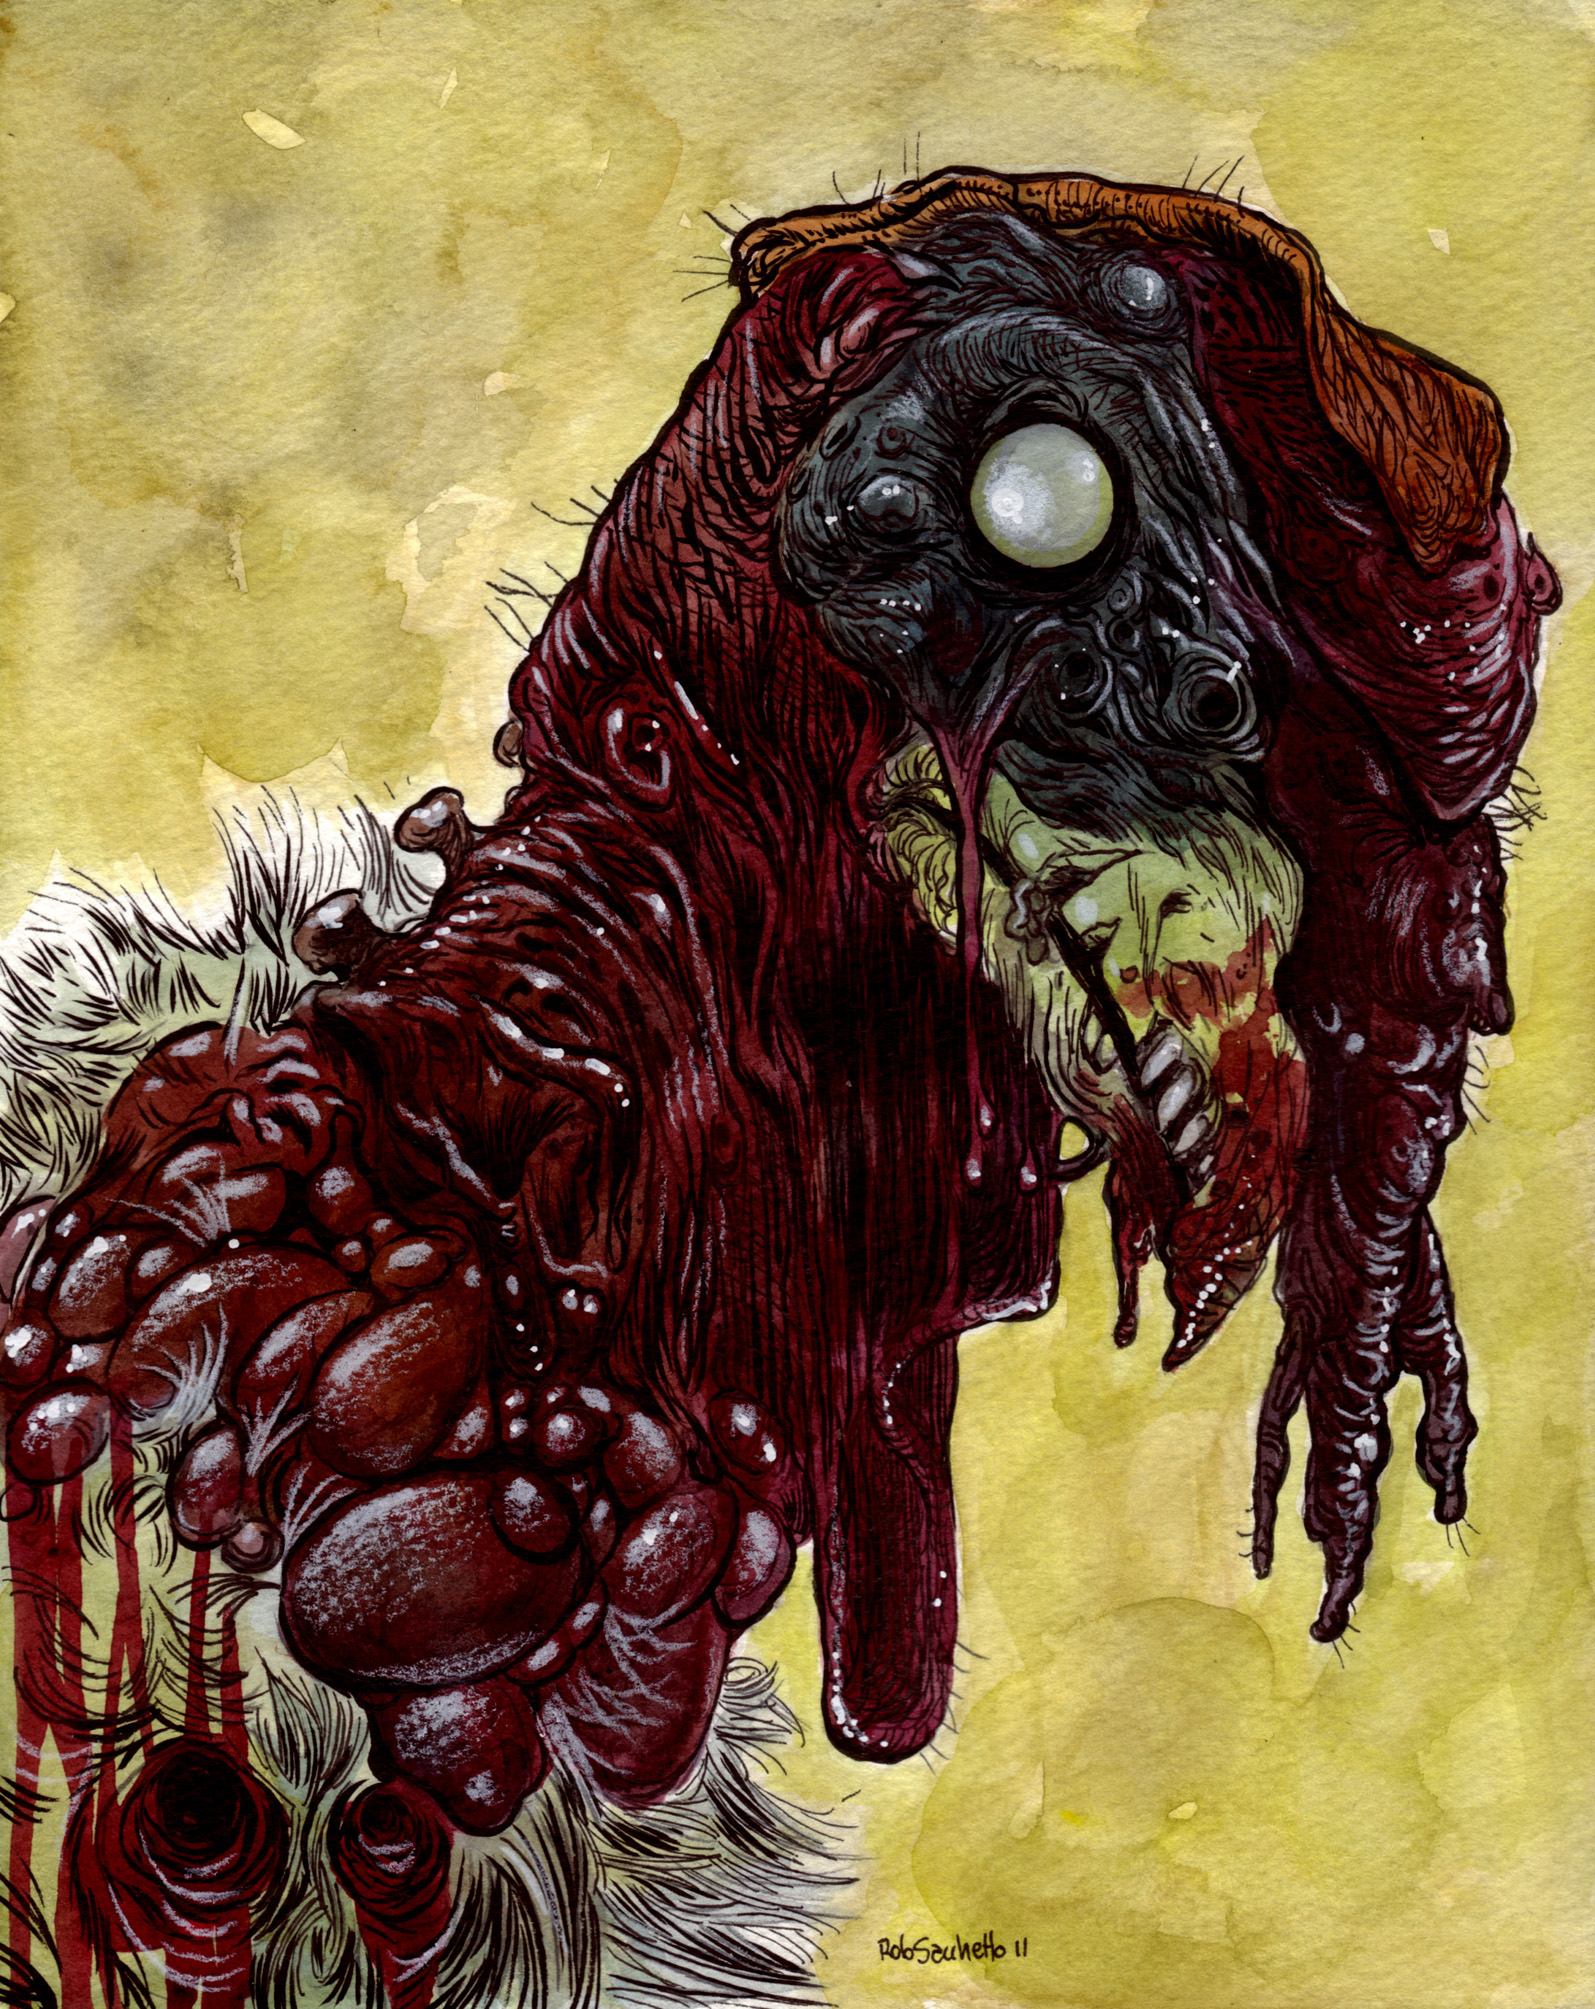 Hey everyone, I just wanted to wish you all a Happy Thanksgiving with one of the many zombified animals that I draw from my Zombie Daily site. I give to you the seldom seen Zombie Turkey! Have a great holiday!